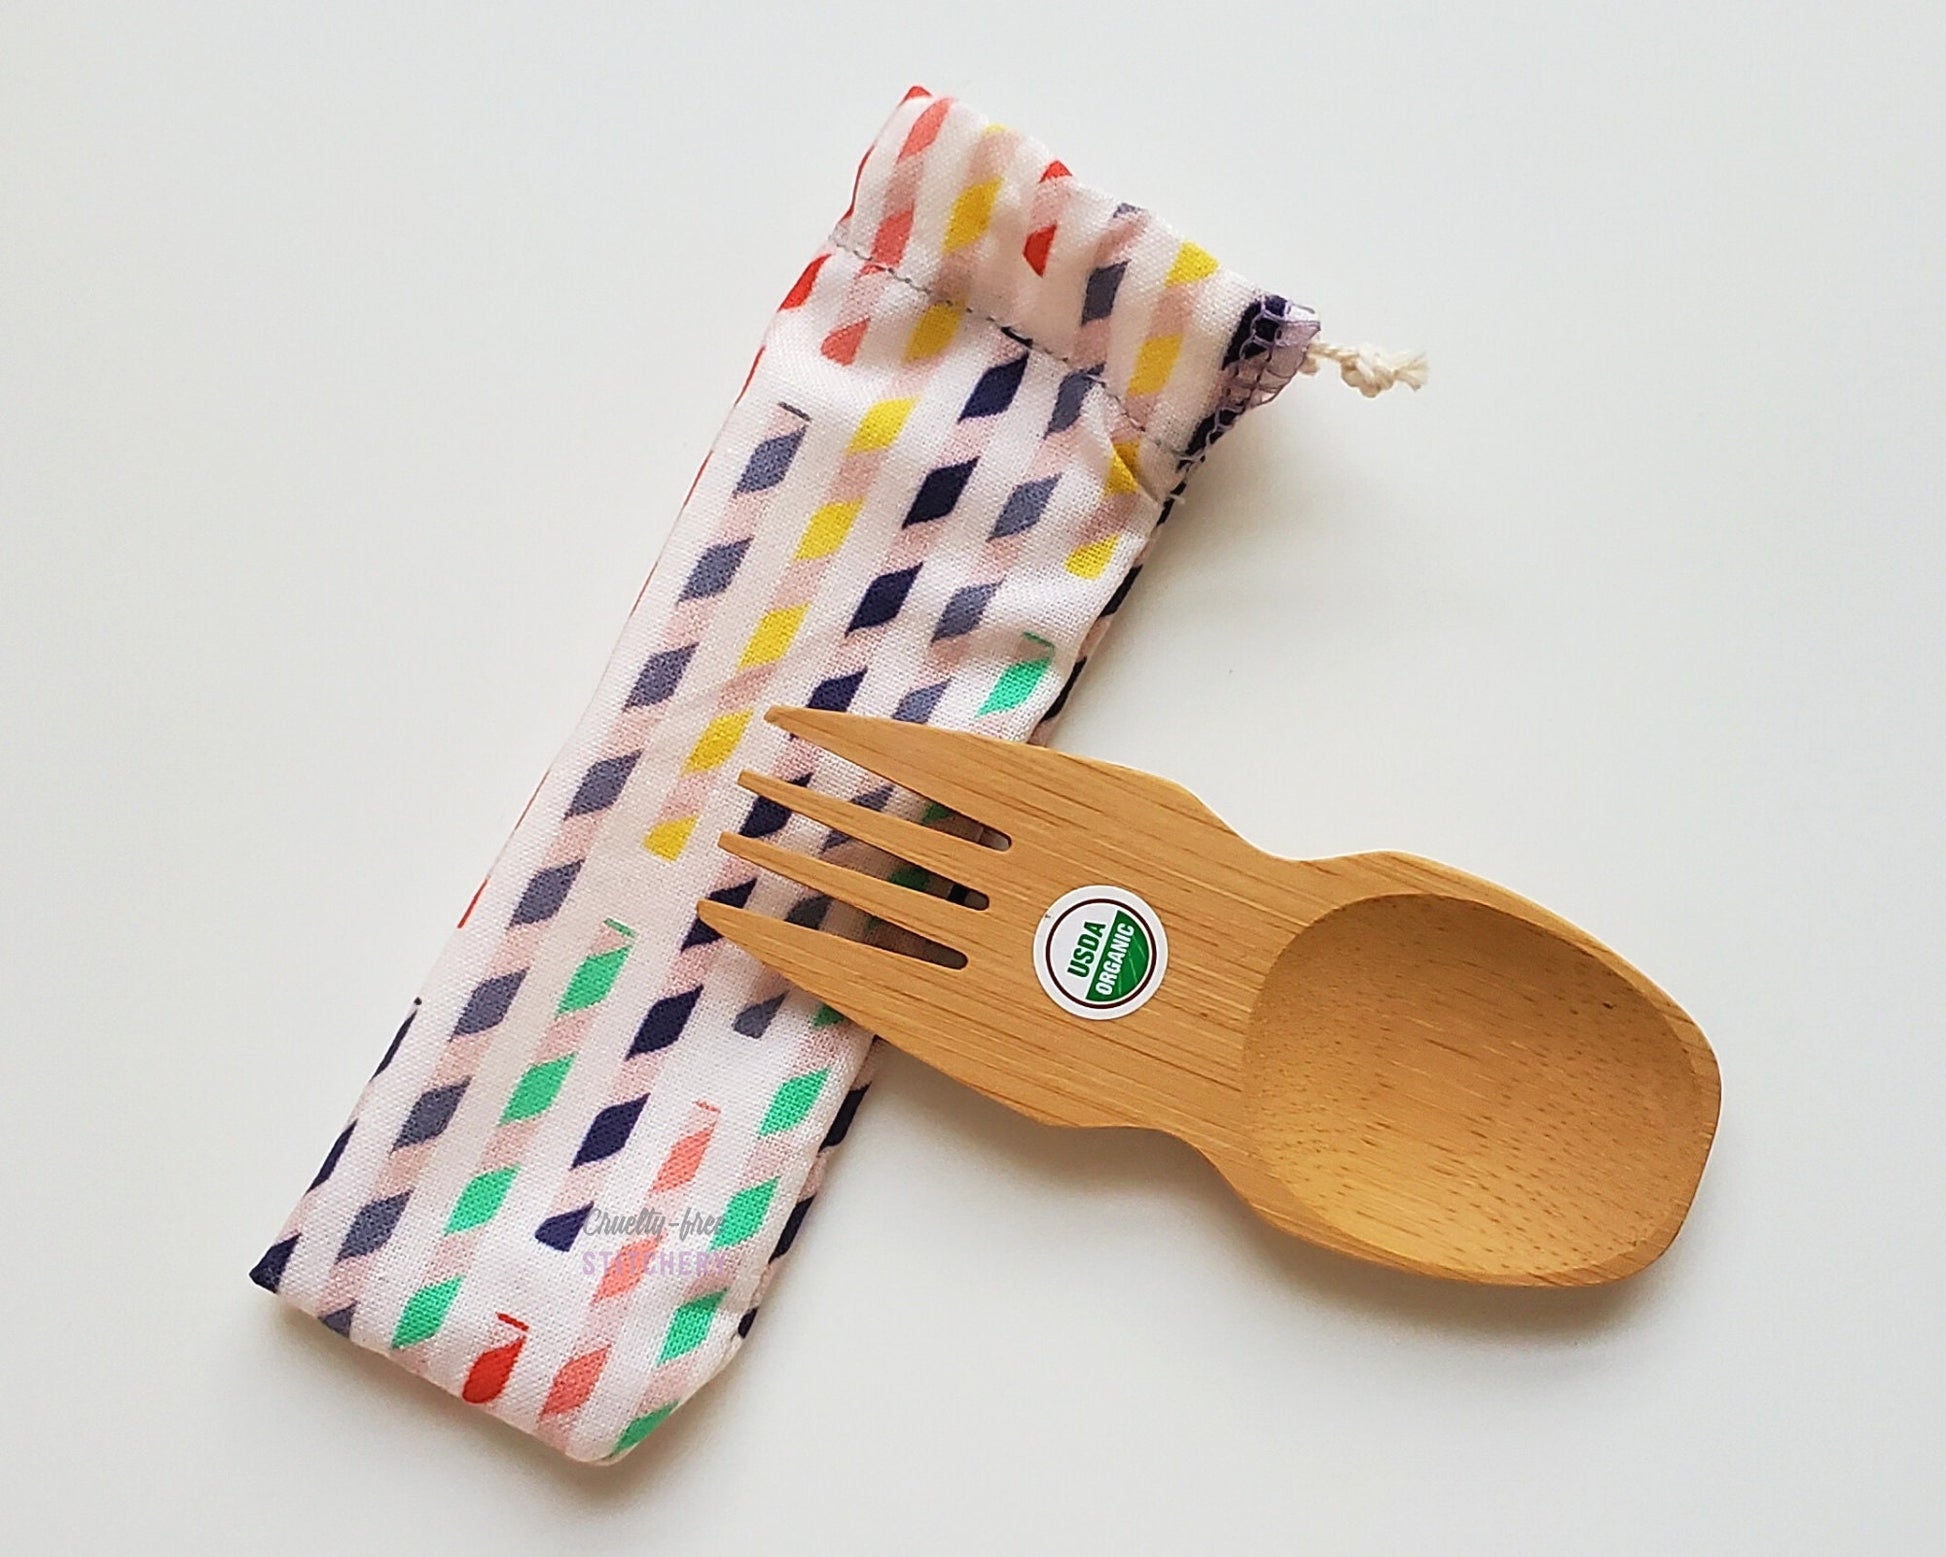 Paper straw print reusable spork pouch. The pouch is sitting diagonally with the spork partially on top pointing the other way. The fork end of the spork is pointing to the left.